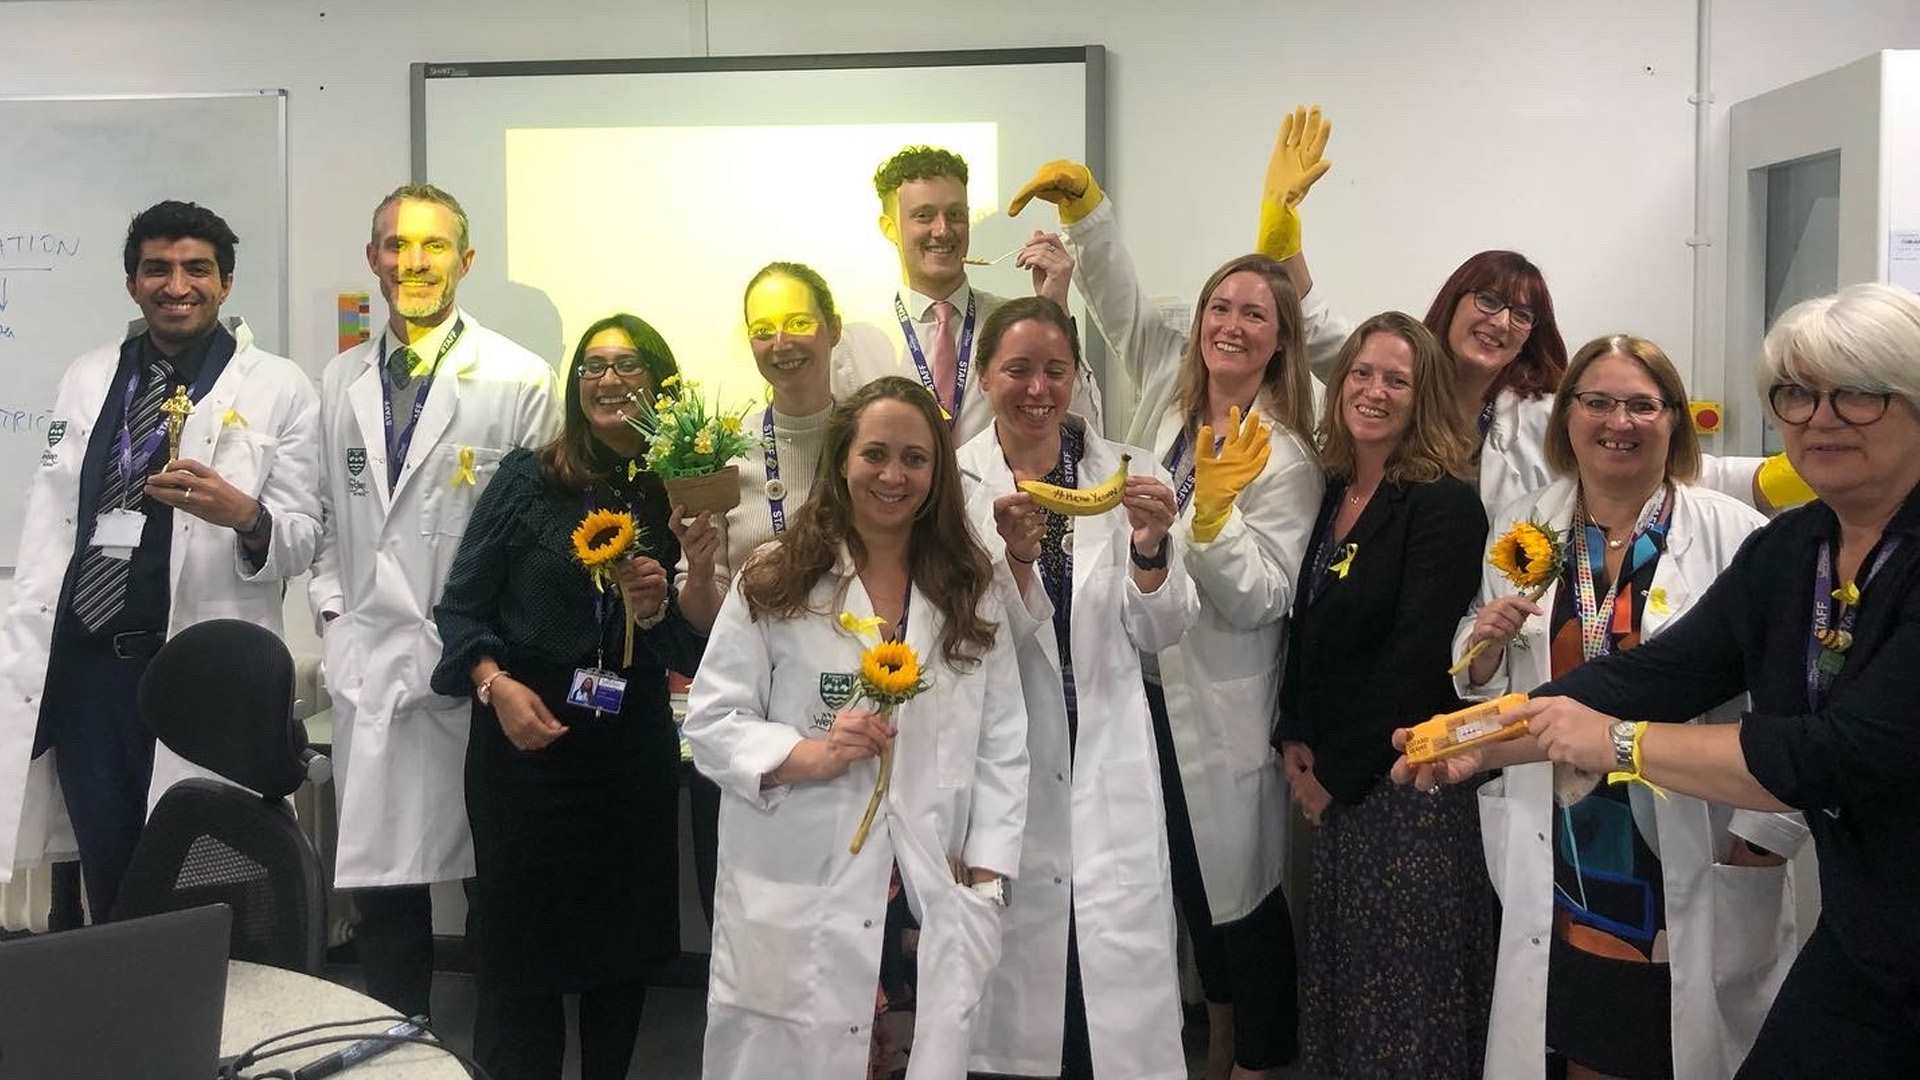 A group of teachers and staff from Weydon School, holding yellow flowers, bananas, and gloves.